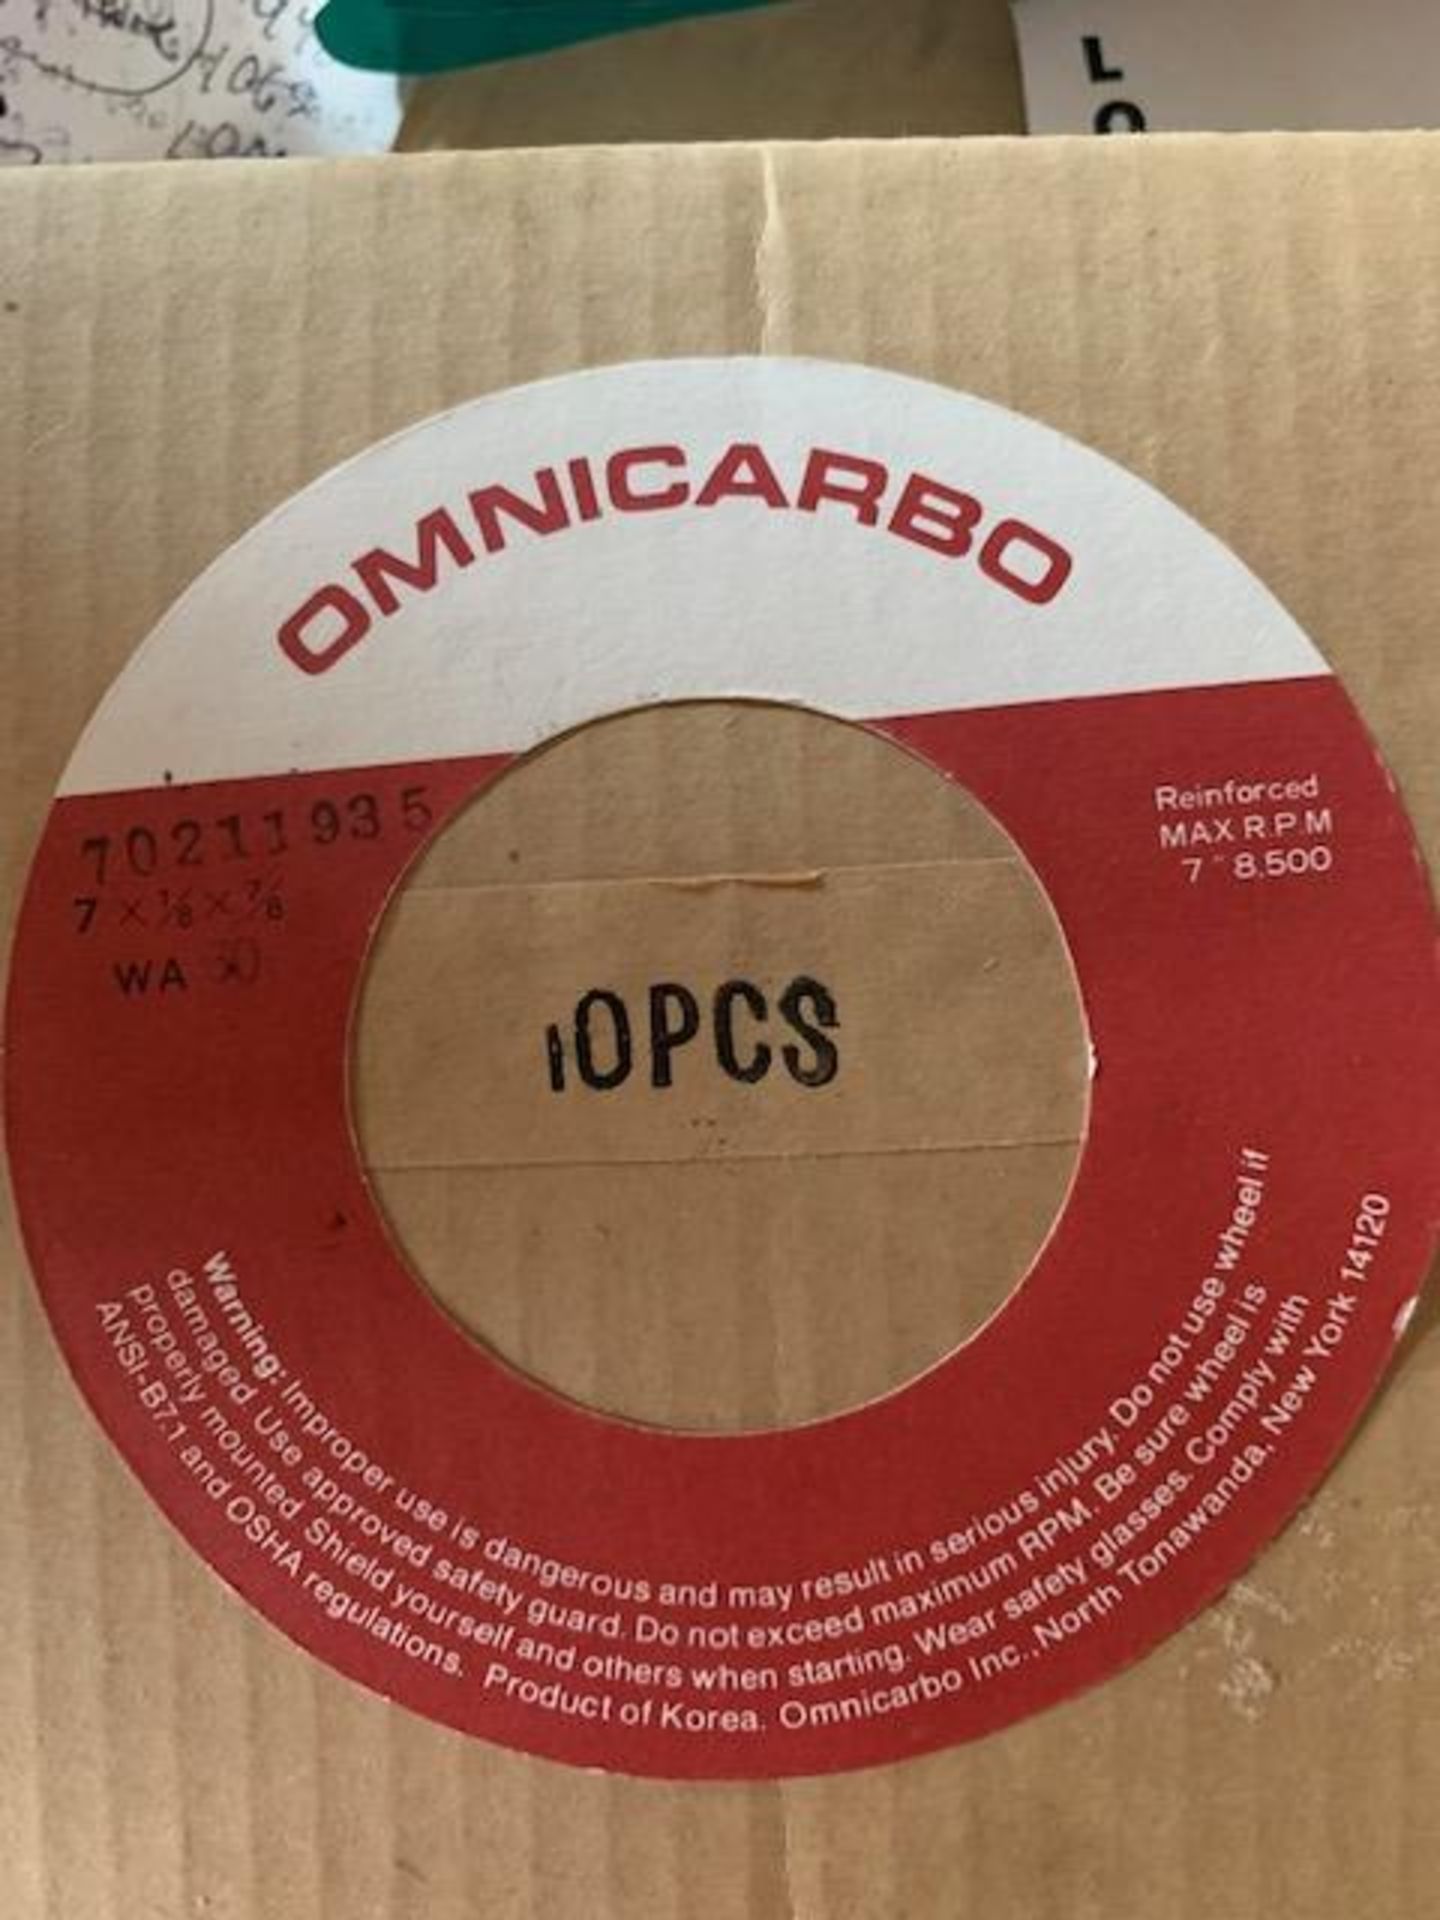 OMNICARBO REINFORCED MAX R.P.M 7” 8,500, 7” x 1/8” x 7/8”, 10 PCS PER BOX, 5 BOXES TORAL, #70211935 - Image 2 of 4